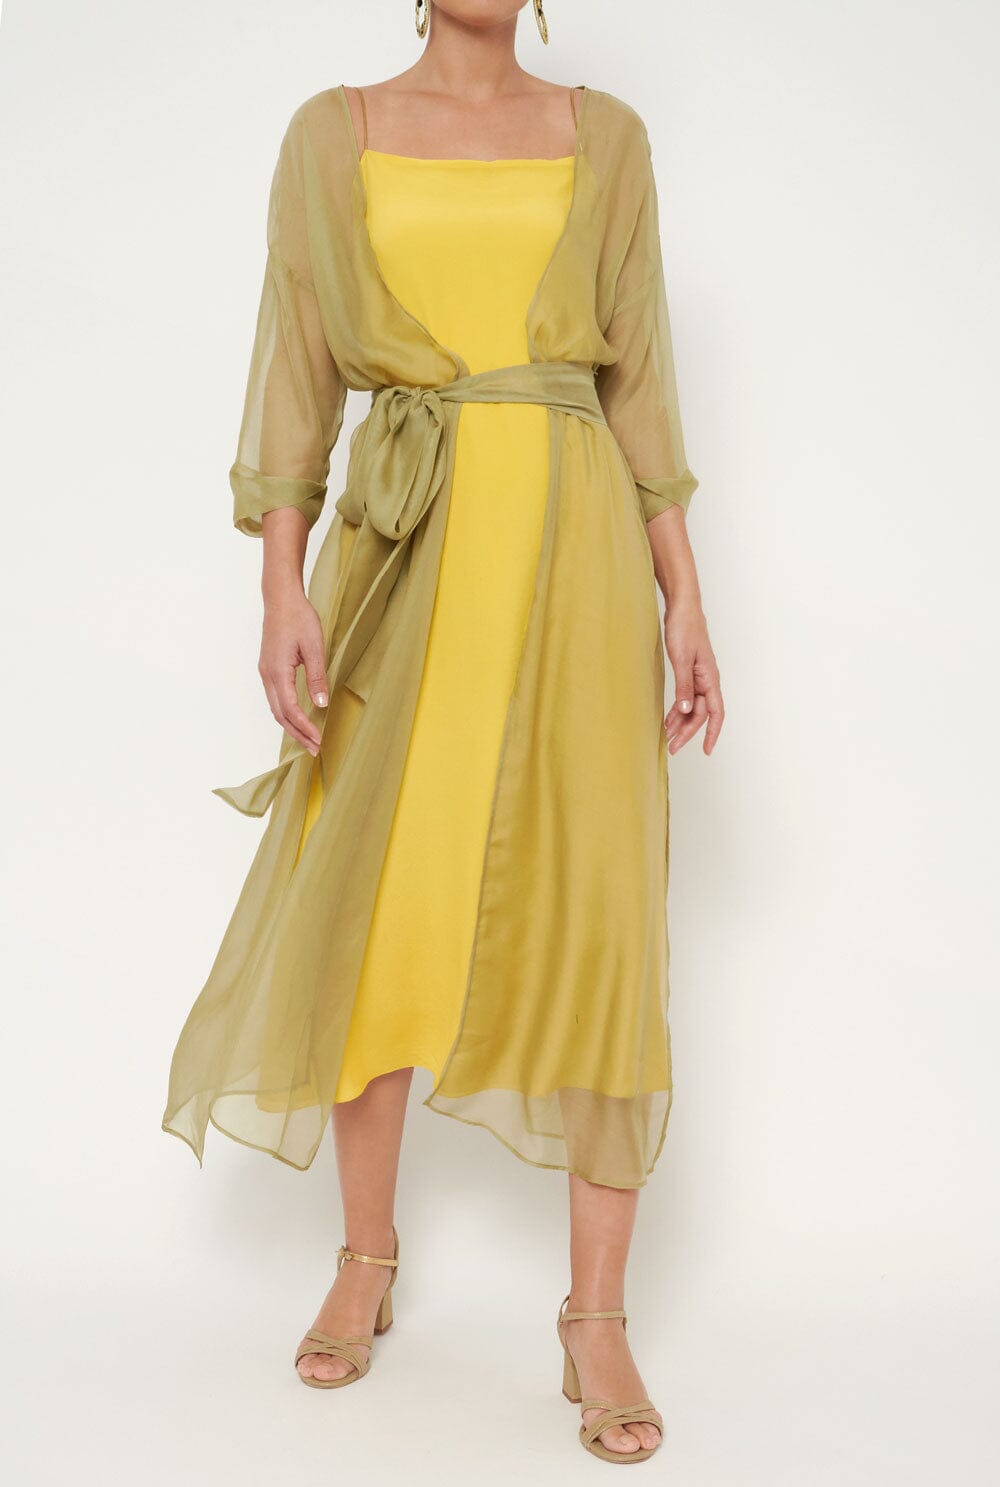 Persefone overdress green Capes & shawls Atelier Aletheia 